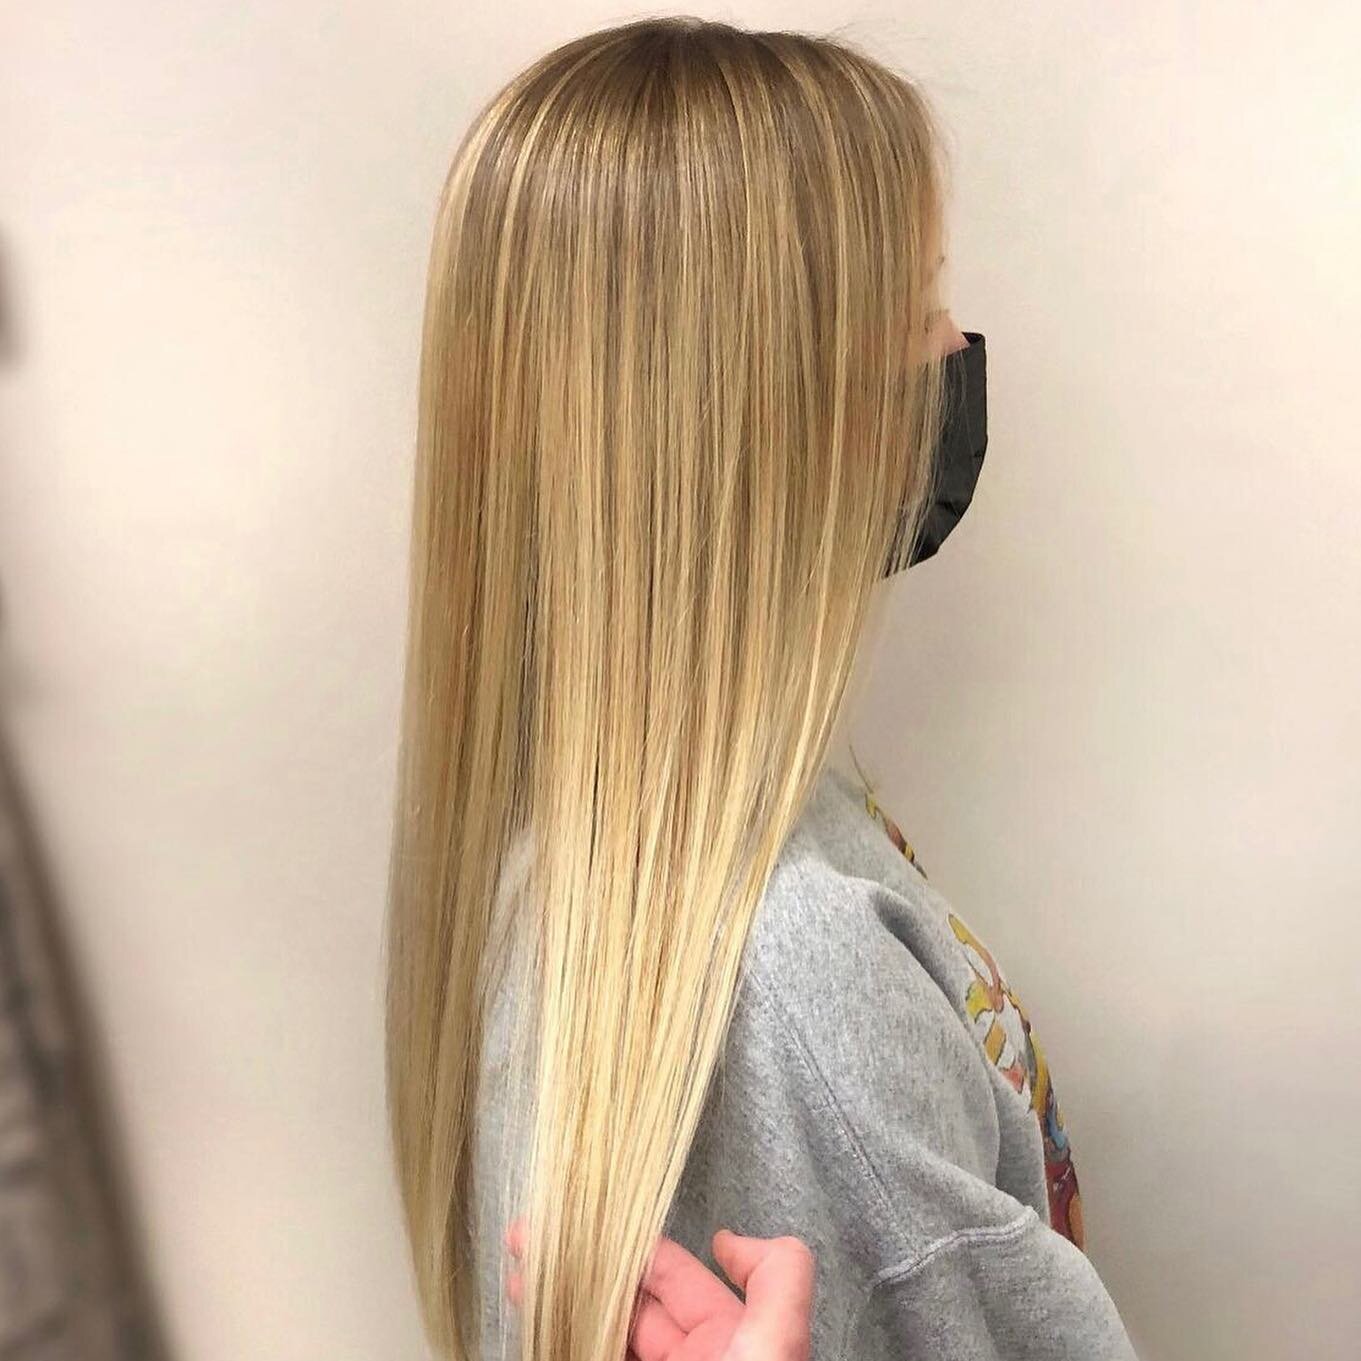 One of the best parts of spring is the hair transformations!☀️

This beauty was ready to go a bit lighter but still wanted something that would grow out soft and not require too much maintenance 

We created a custom plan that gave her the best of bo